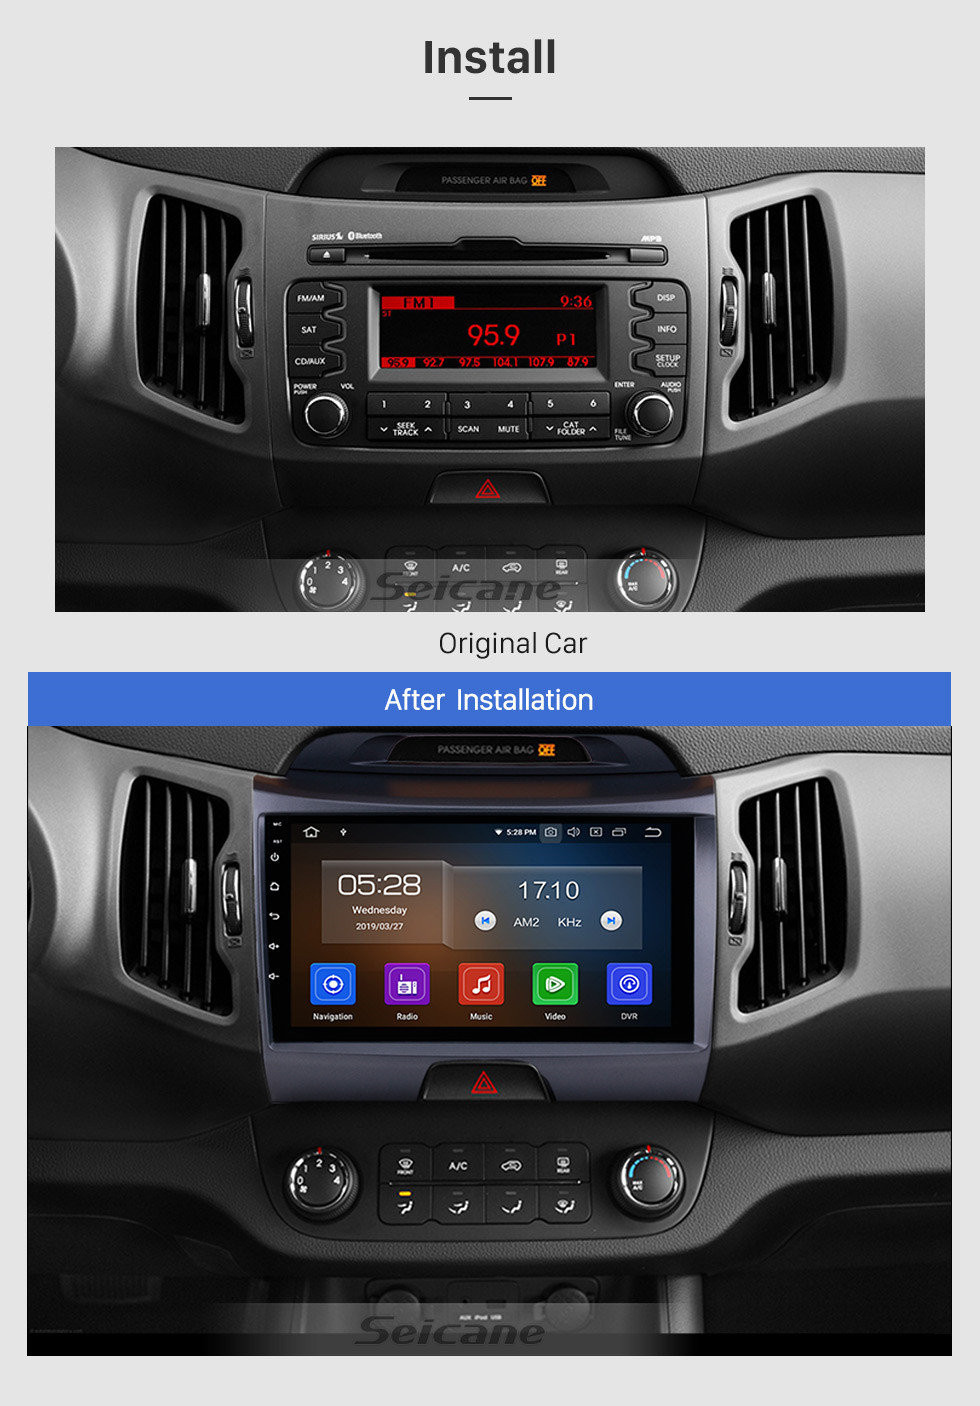 Seicane Android 11.0 9 inch HD 1024*600 Touch Screen Car Radio For 2010-2015 KIA Sportage GPS Navigation Bluetooth WIFI USB Mirror Link Support DVR OBD2 4G WiFi Steering Wheel Control Backup Camera